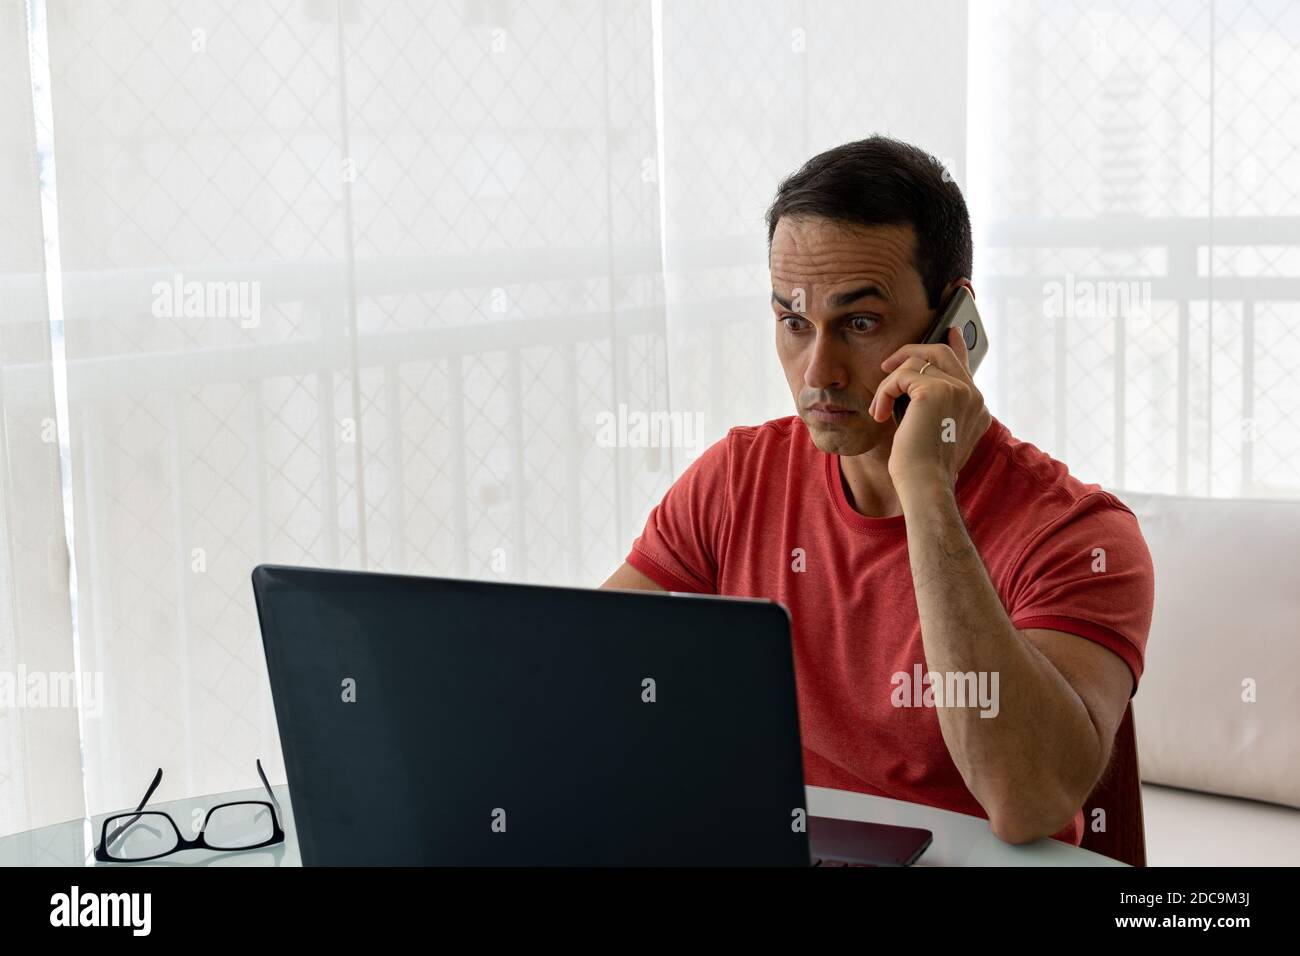 Mature man with cell phone in hand, looking at laptop with wide eyes. Stock Photo